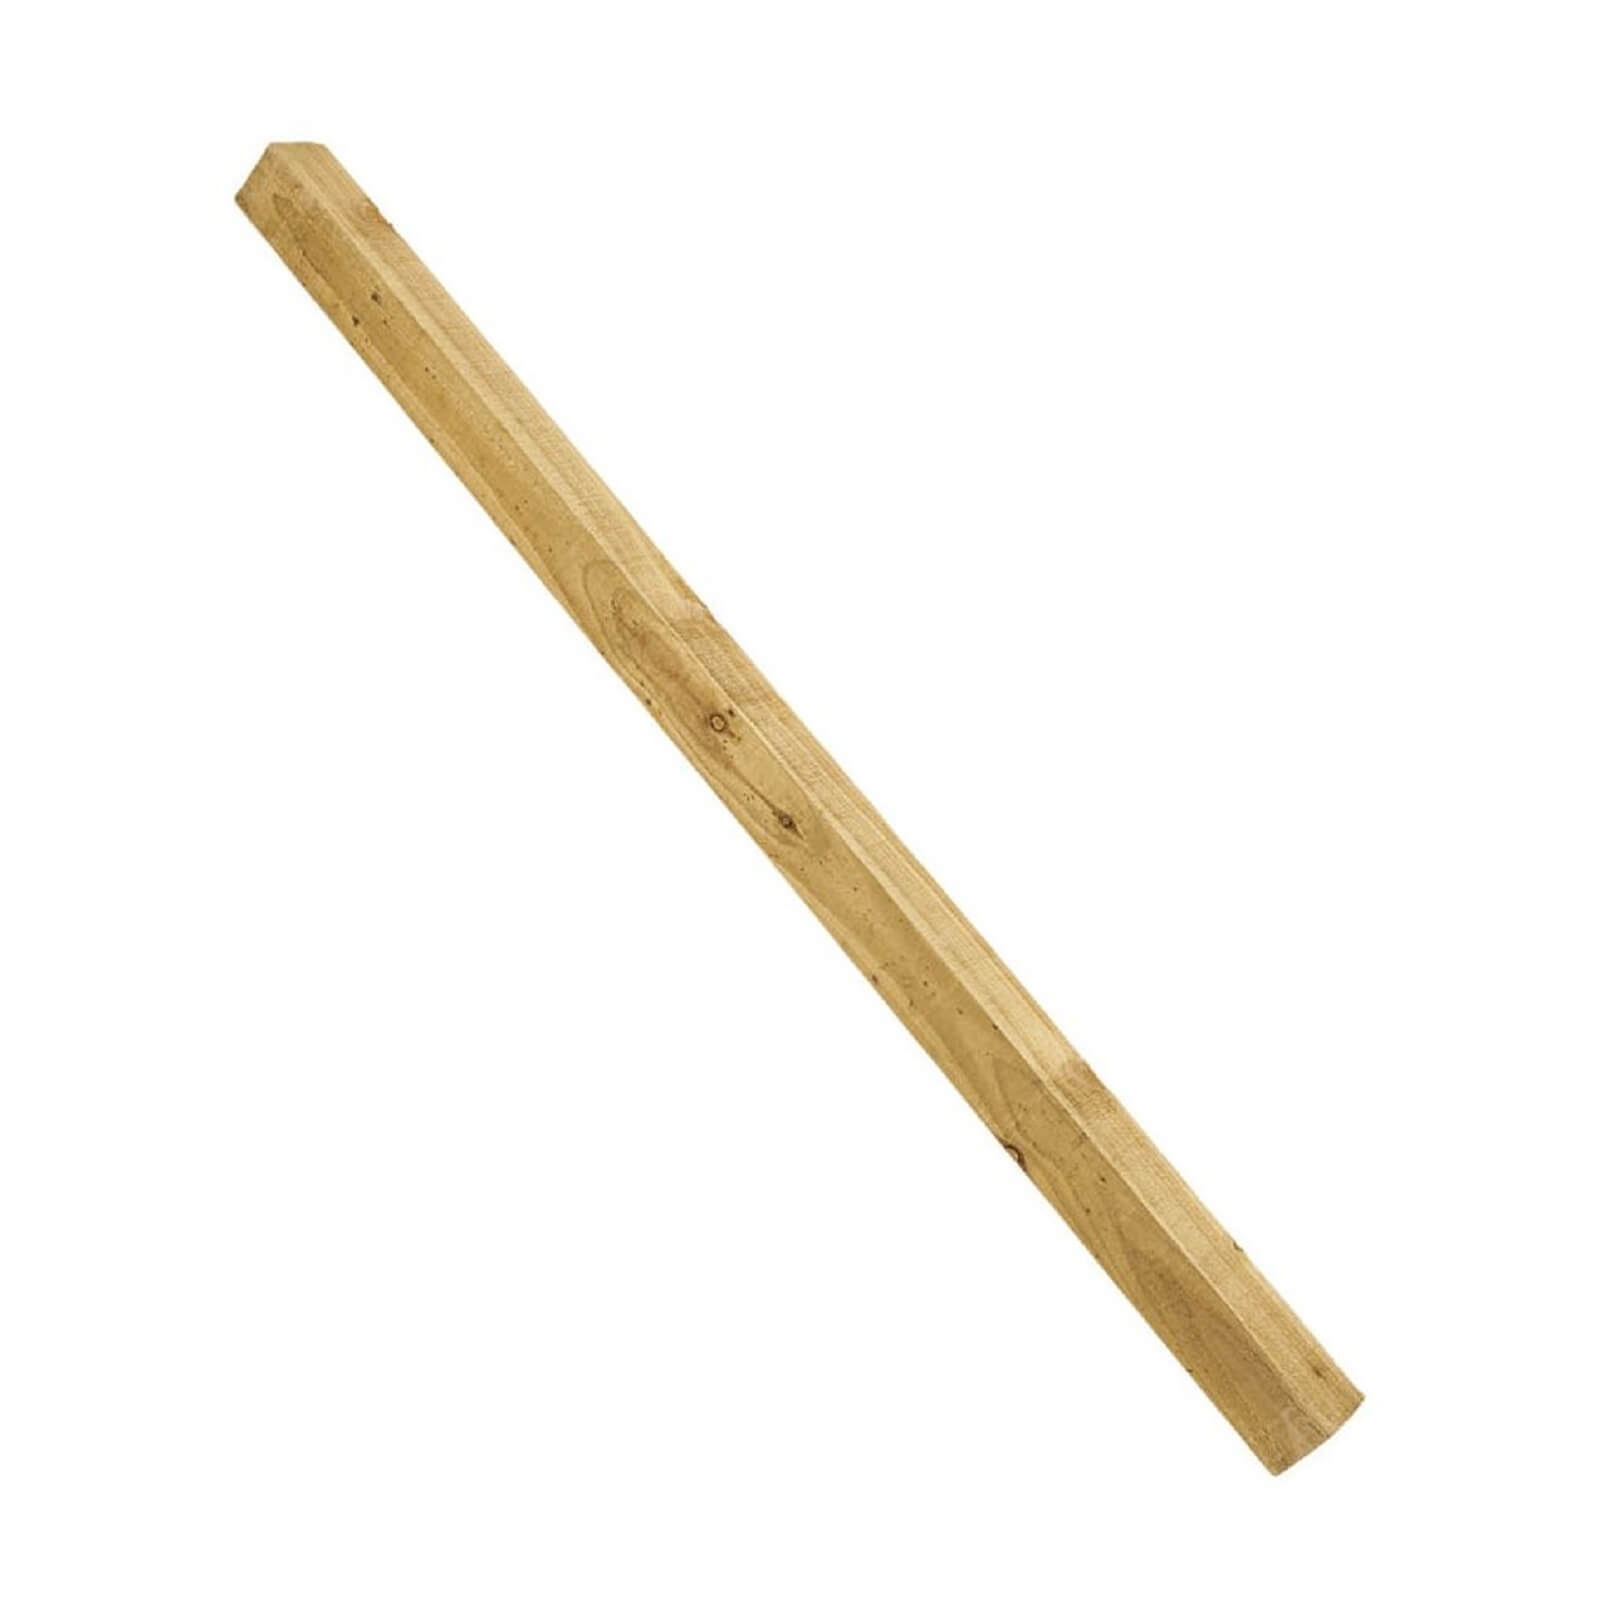 Photo of Larchlap Sawn Post - 8ft X 3in X 3in - 4 Pack